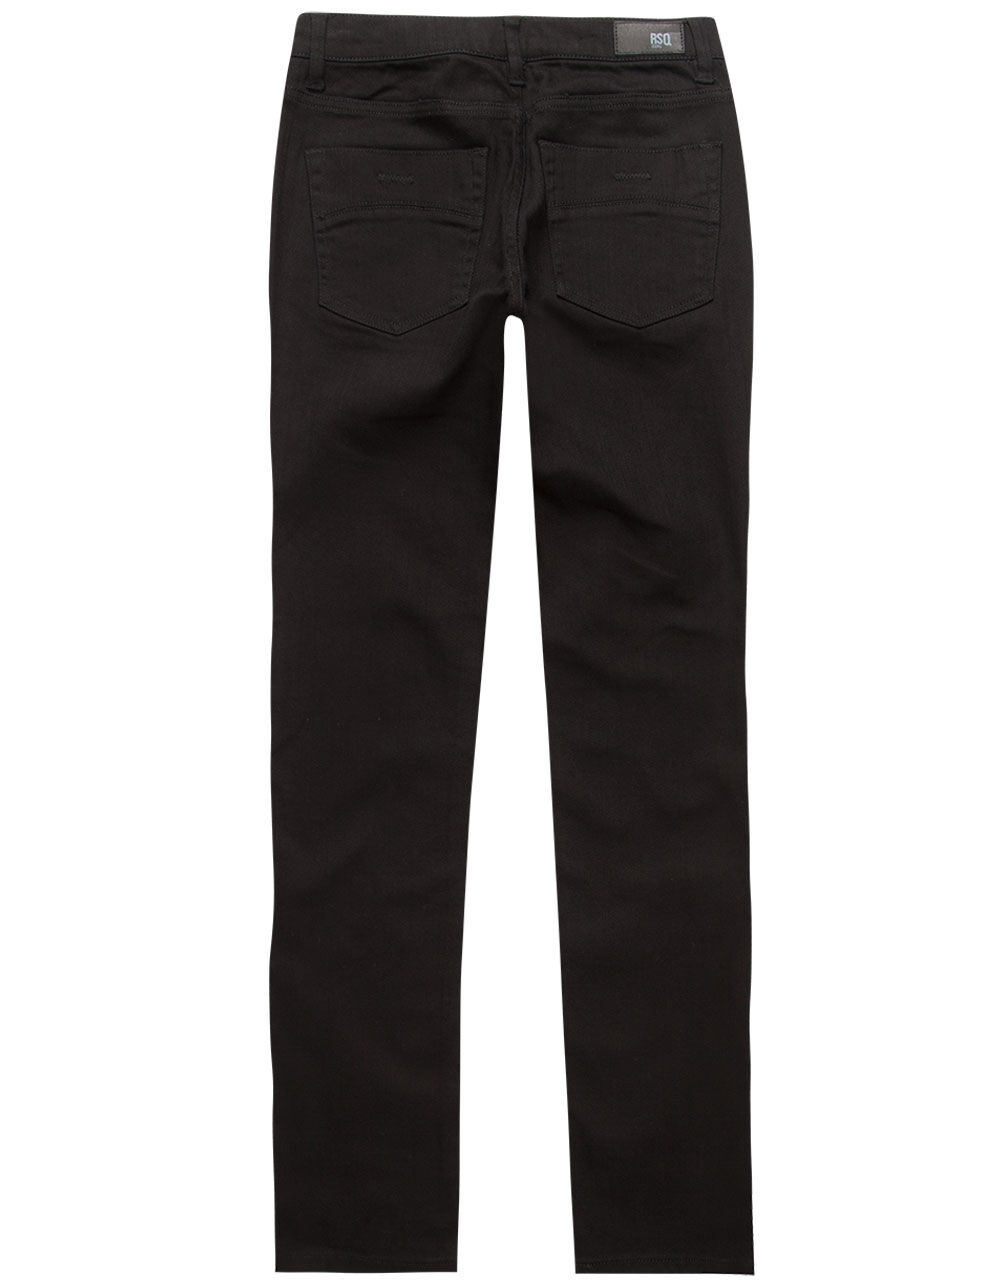 RSQ London Boys Skinny Stretch Jeans image number 4